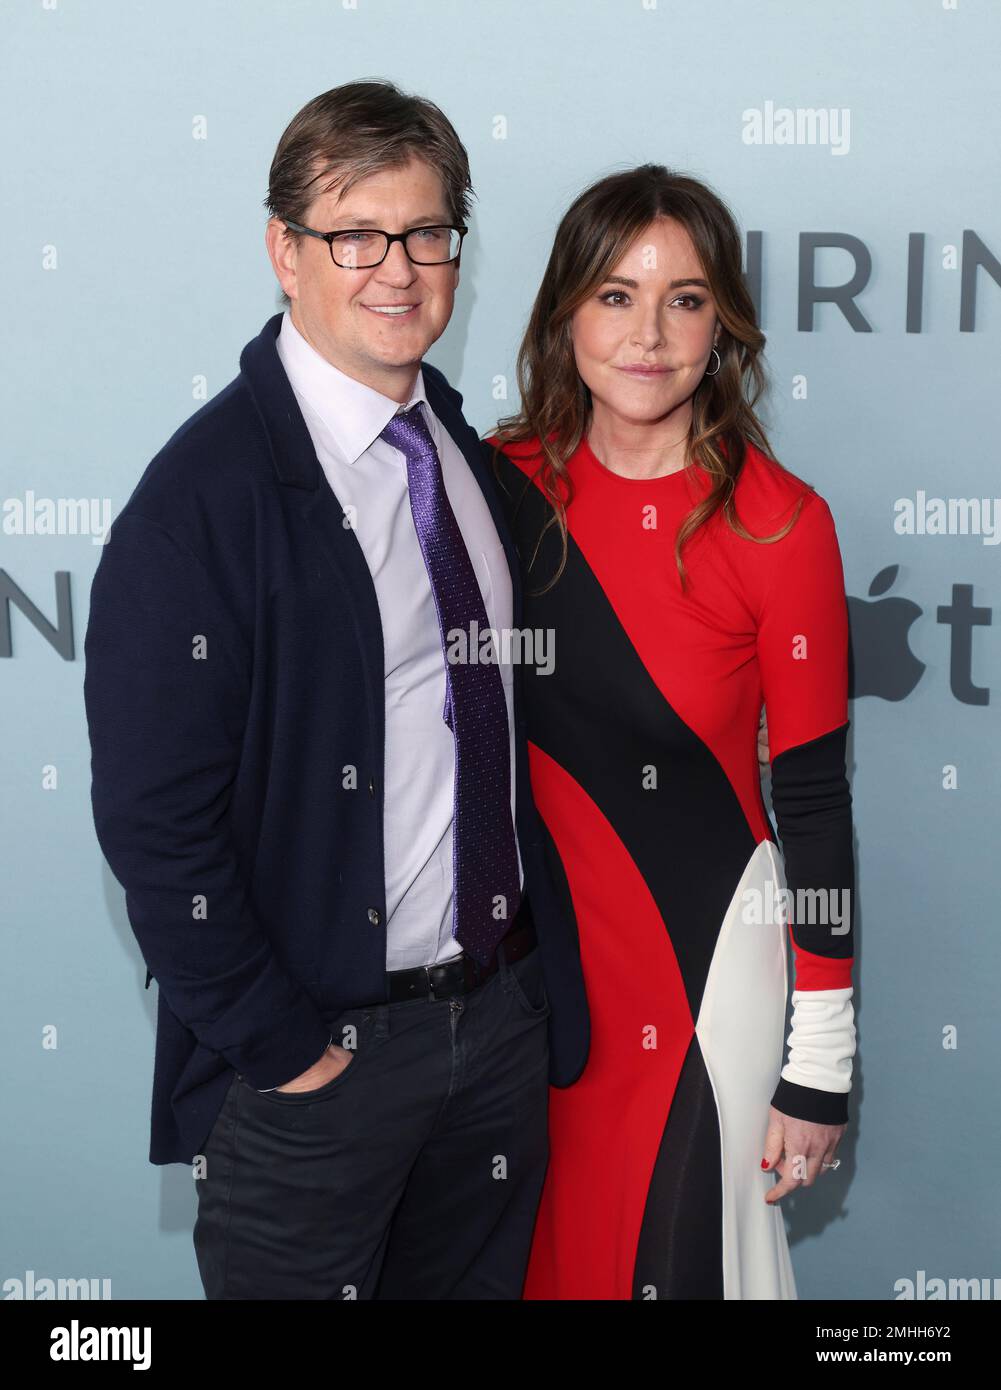 (L-R) Bill Lawrence and Christa Miller attend the premiere of the comedy TV series 'Shrinking' at the Directors Guild of America on Thursday, January 26, 2023. Storyline: A grieving therapist starts to tell his clients exactly what he thinks. Ignoring his training and ethics, he finds himself making huge changes to people's lives, including his own. Photo by Greg Grudt/UPI Credit: UPI/Alamy Live News Stock Photo